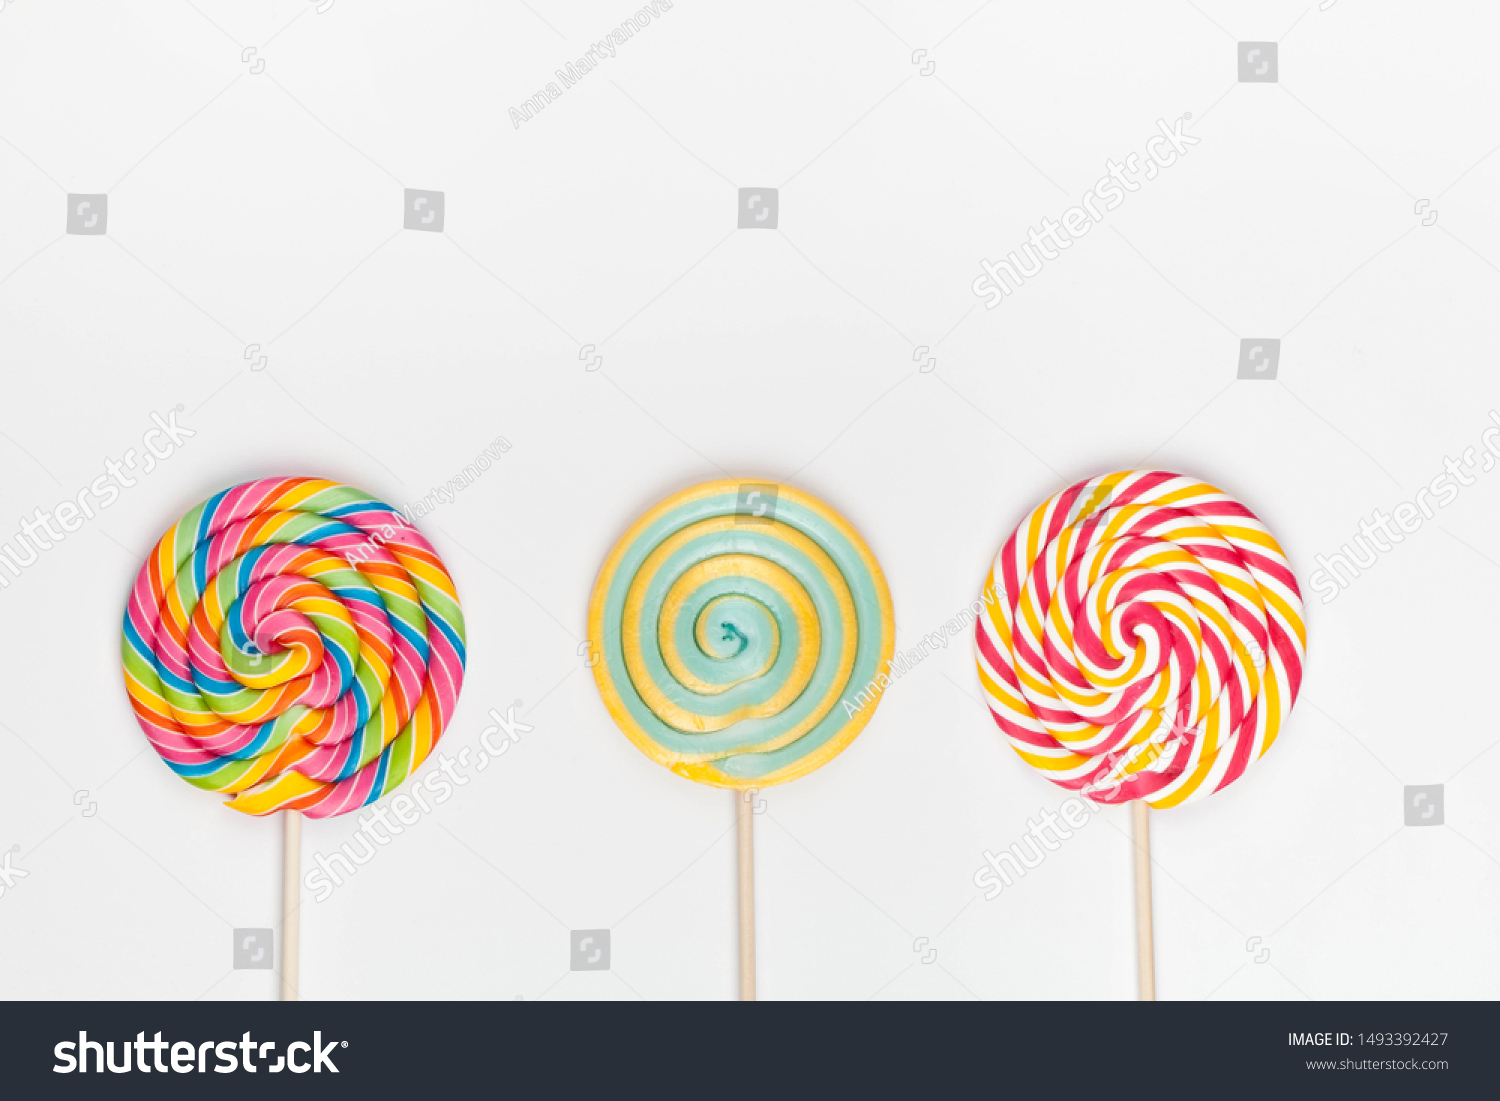 Rainbow Color Lollipops On White Background Stock Photo 1493392427 ...